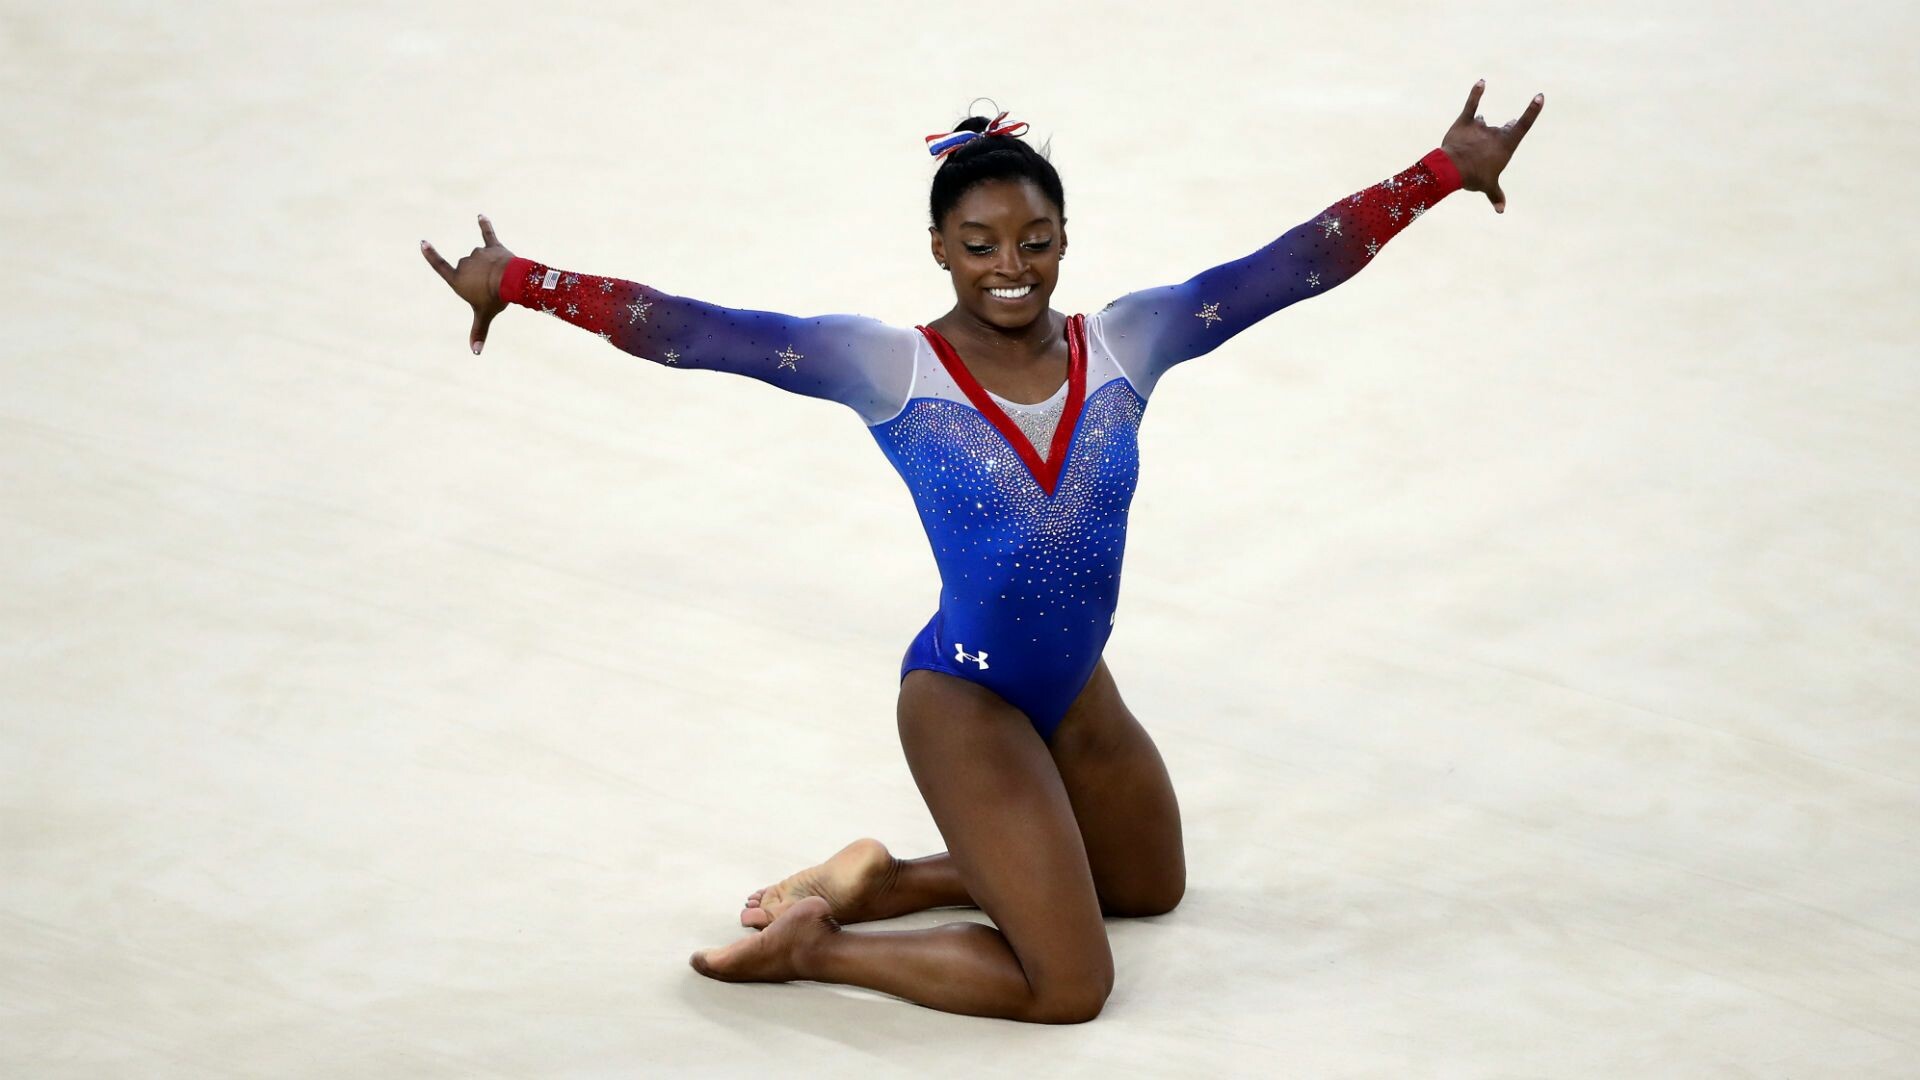 Simone Biles: She was chosen by Team USA to be the flag bearer in the closing ceremonies at Rio 2016 Summer Olympics. 1920x1080 Full HD Background.